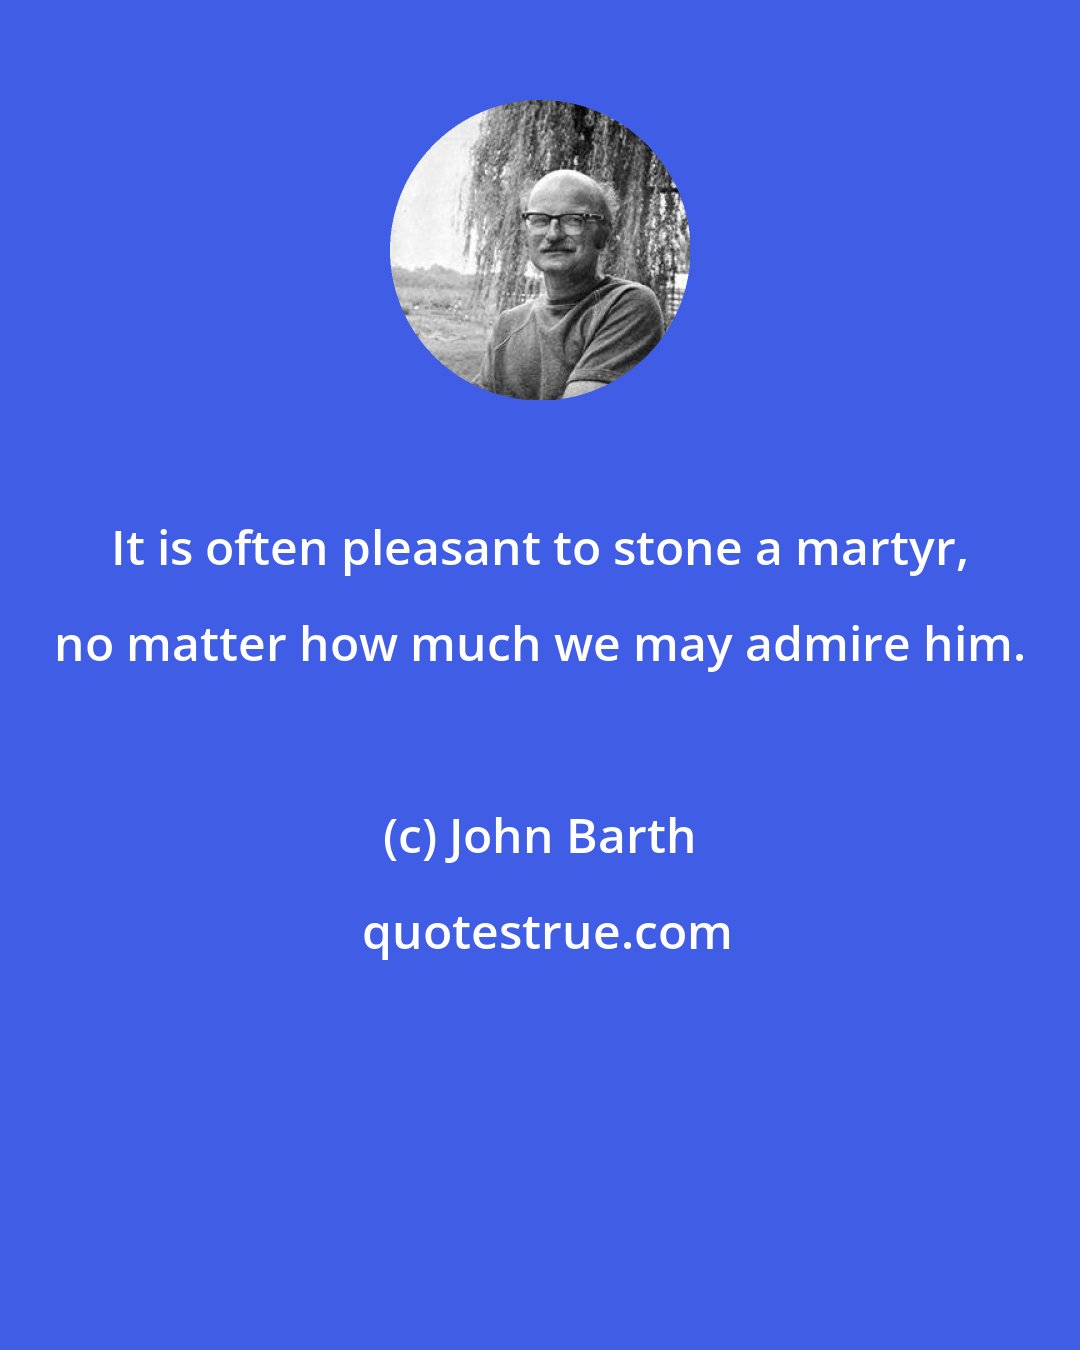 John Barth: It is often pleasant to stone a martyr, no matter how much we may admire him.